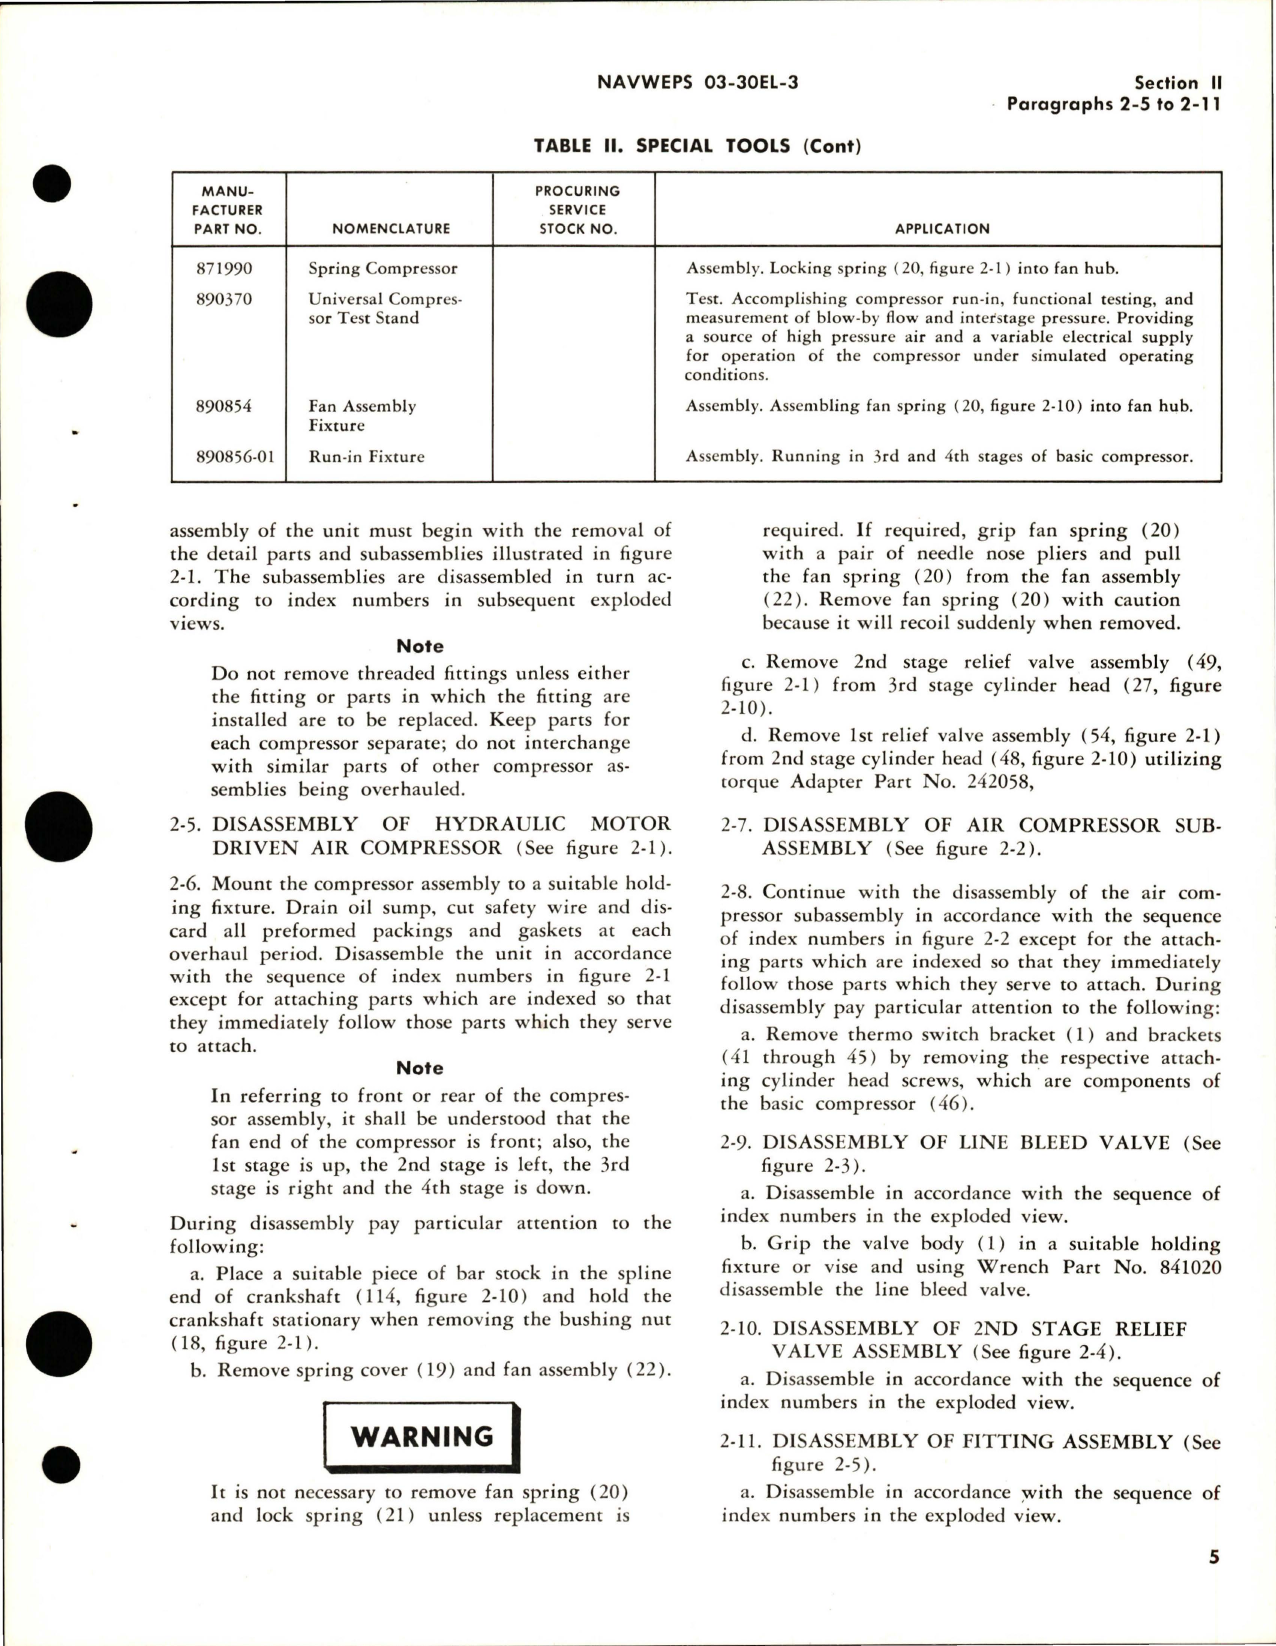 Sample page 9 from AirCorps Library document: Overhaul Instructions for Hydraulic Motor Driven Air Compressor - 891406